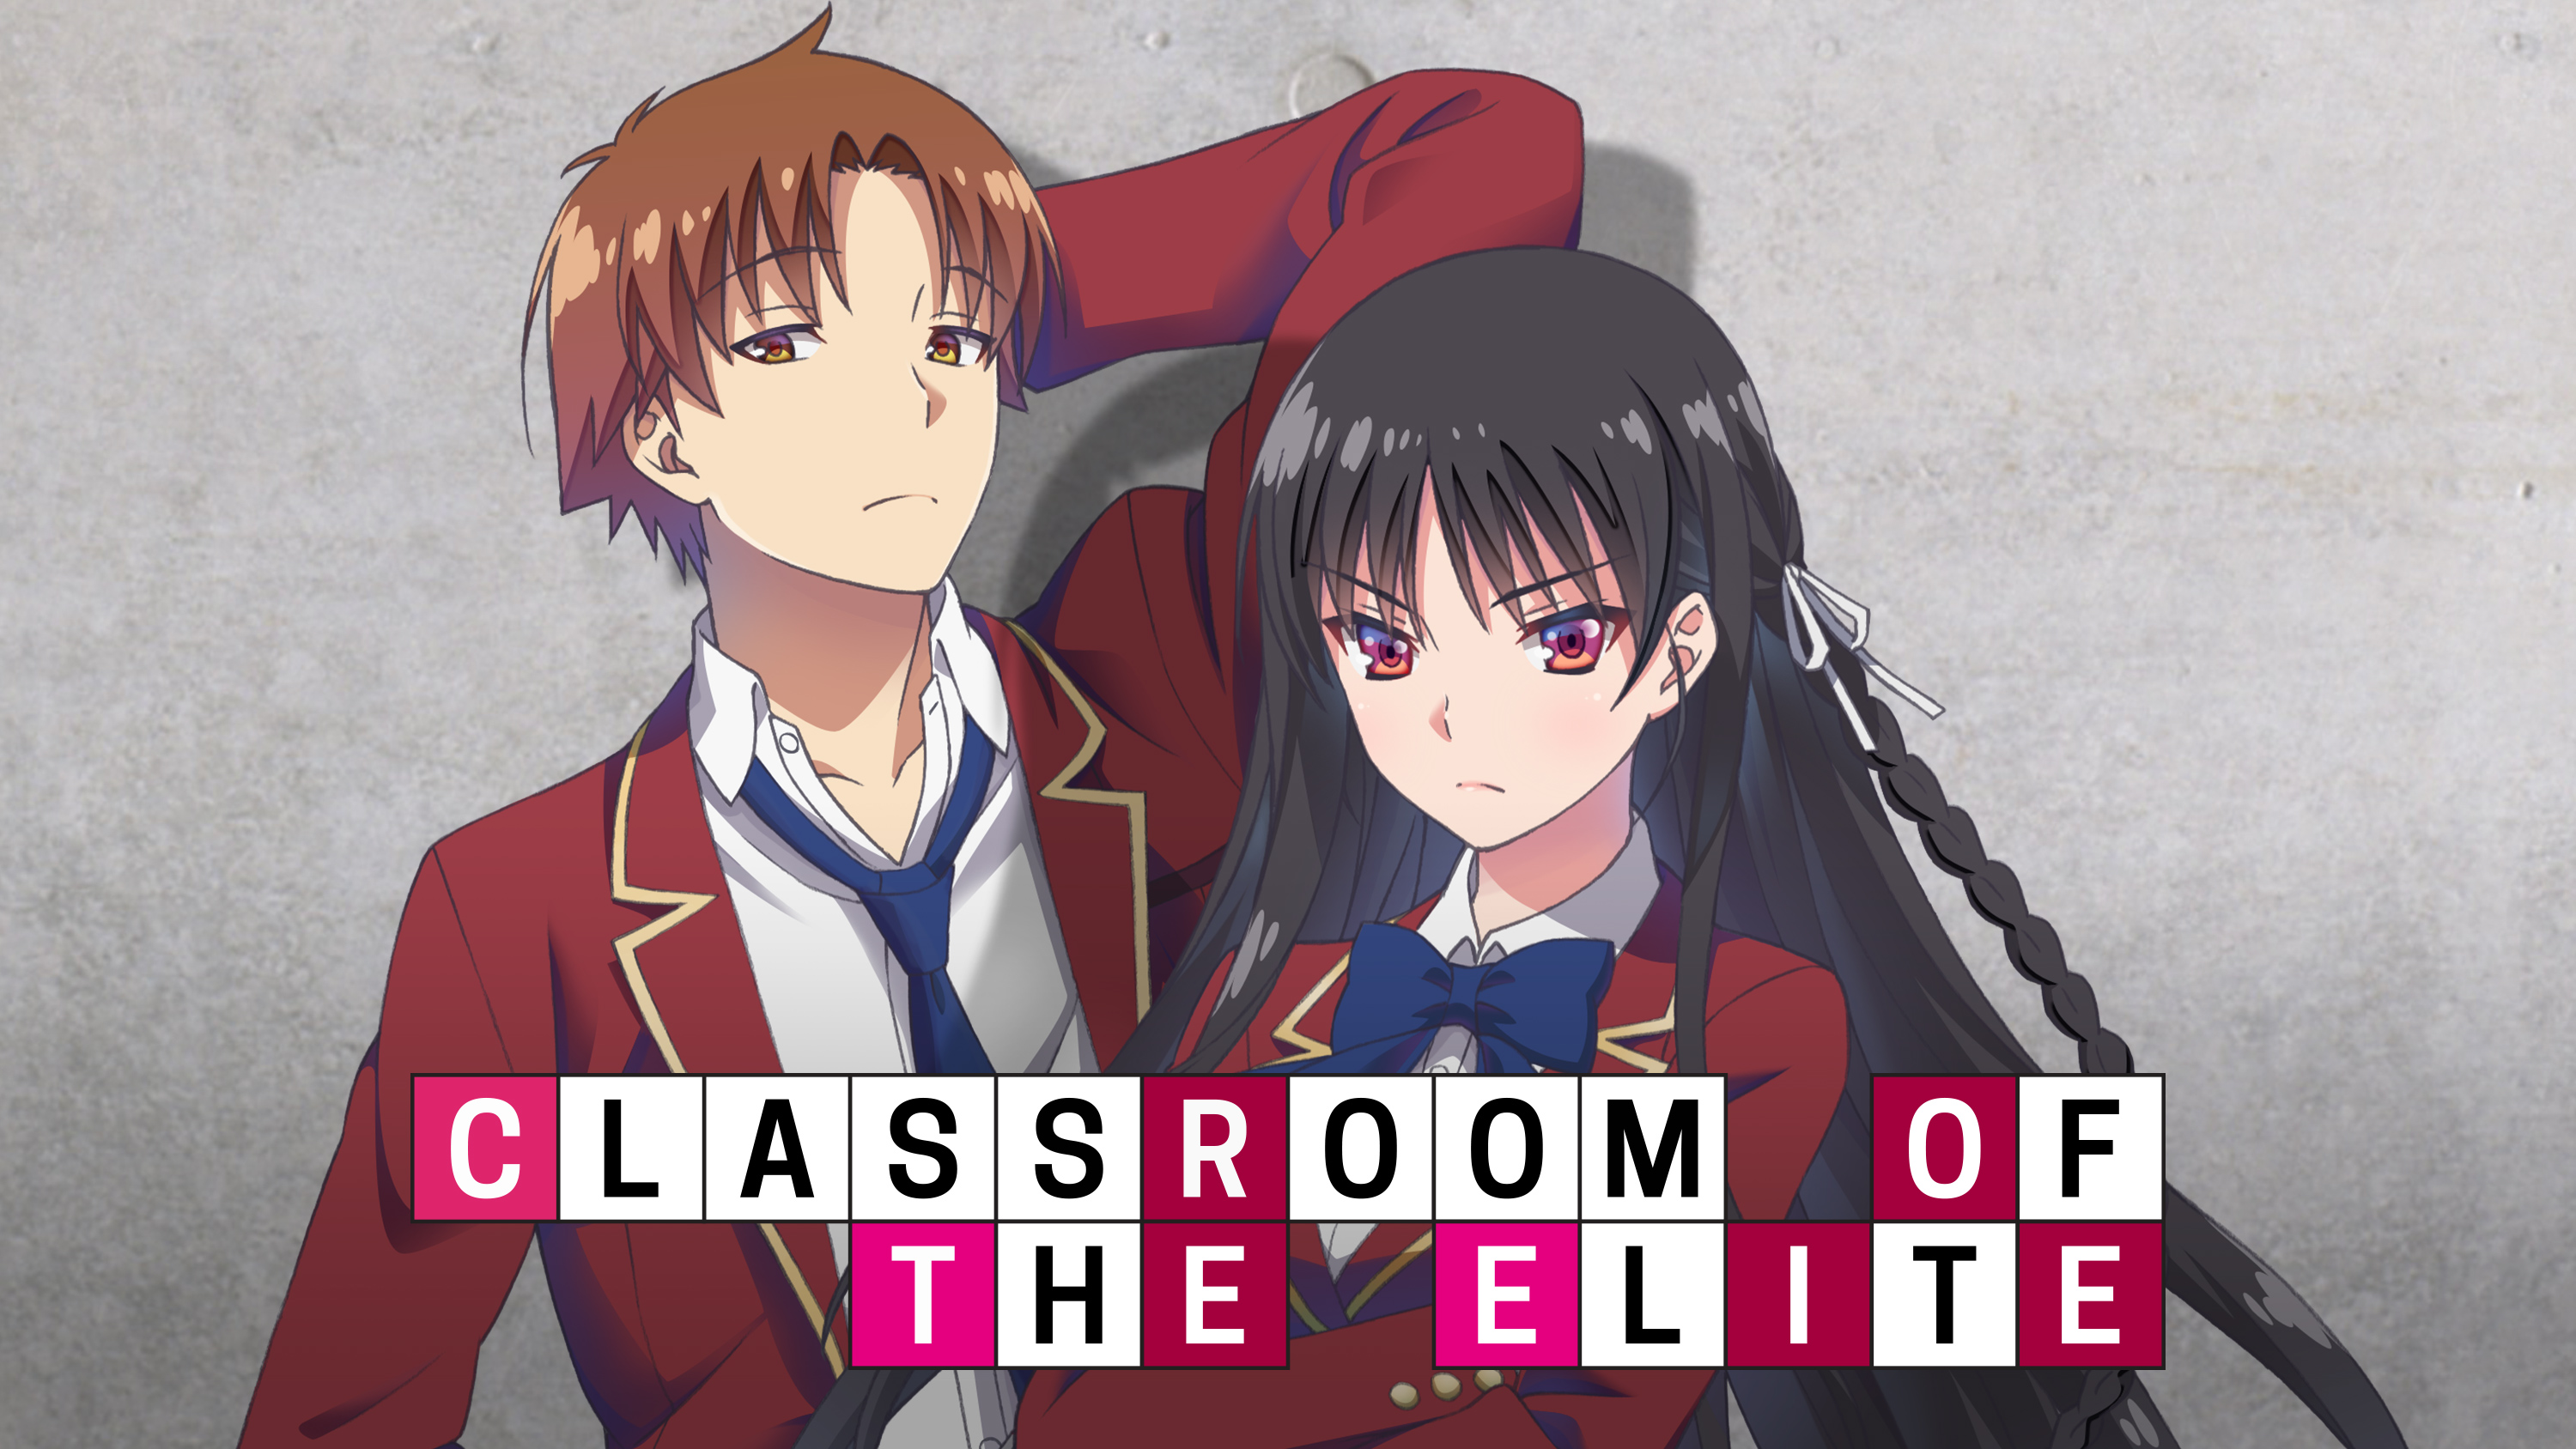 Watch Classroom Of The Elite Episodes Sub & Dub. Comedy, Slice